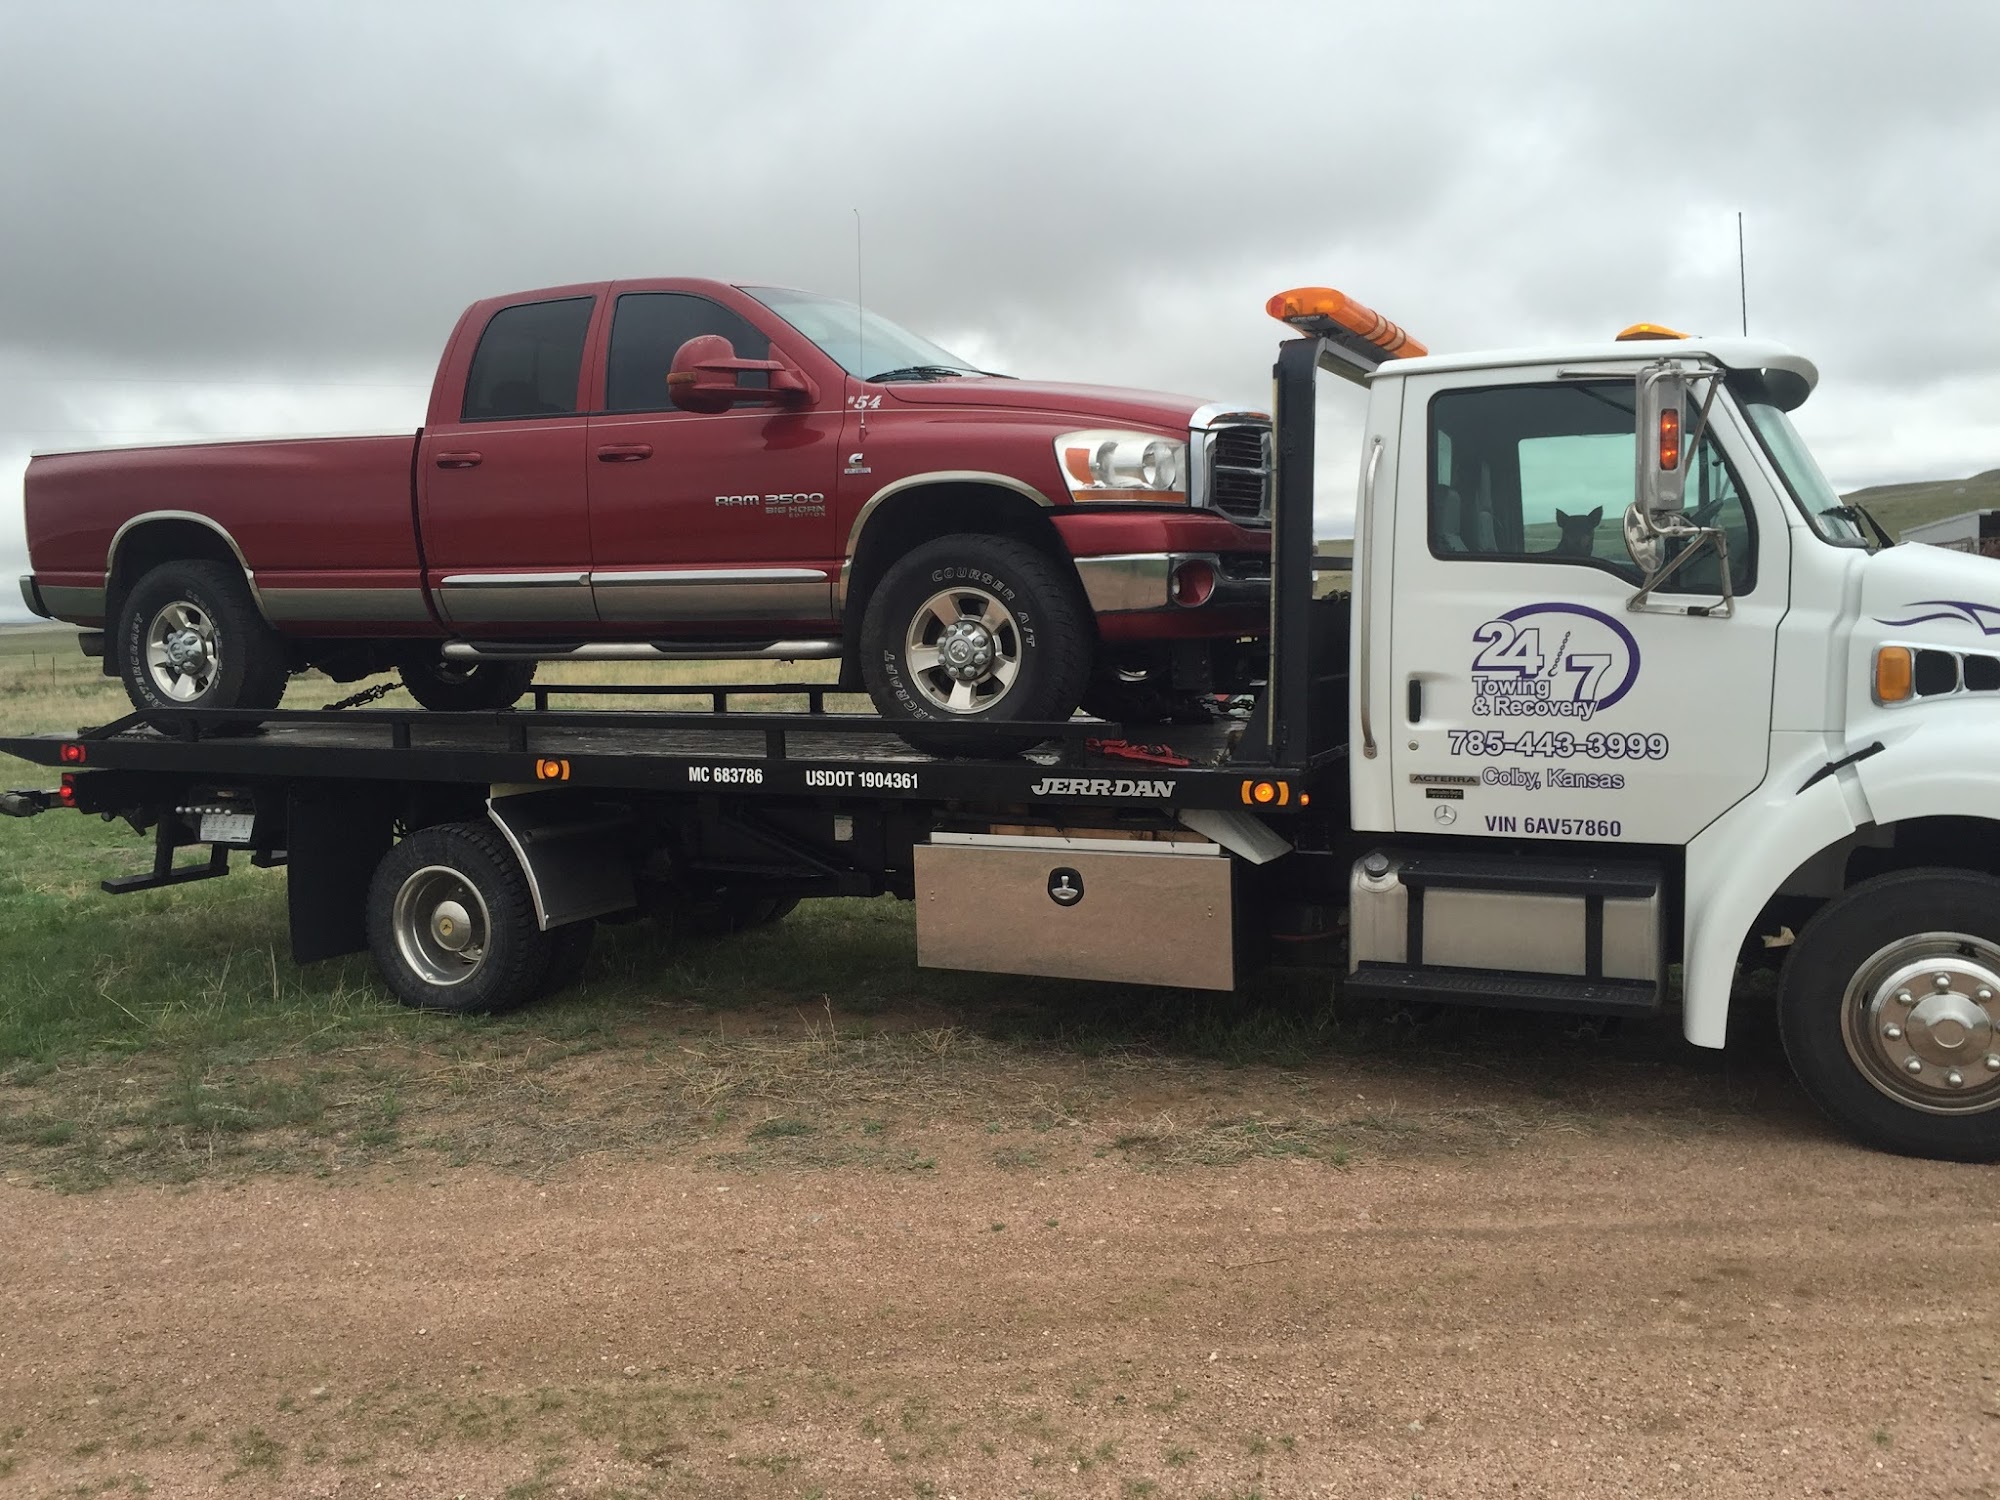 24/7 Towing & Recovery LLc